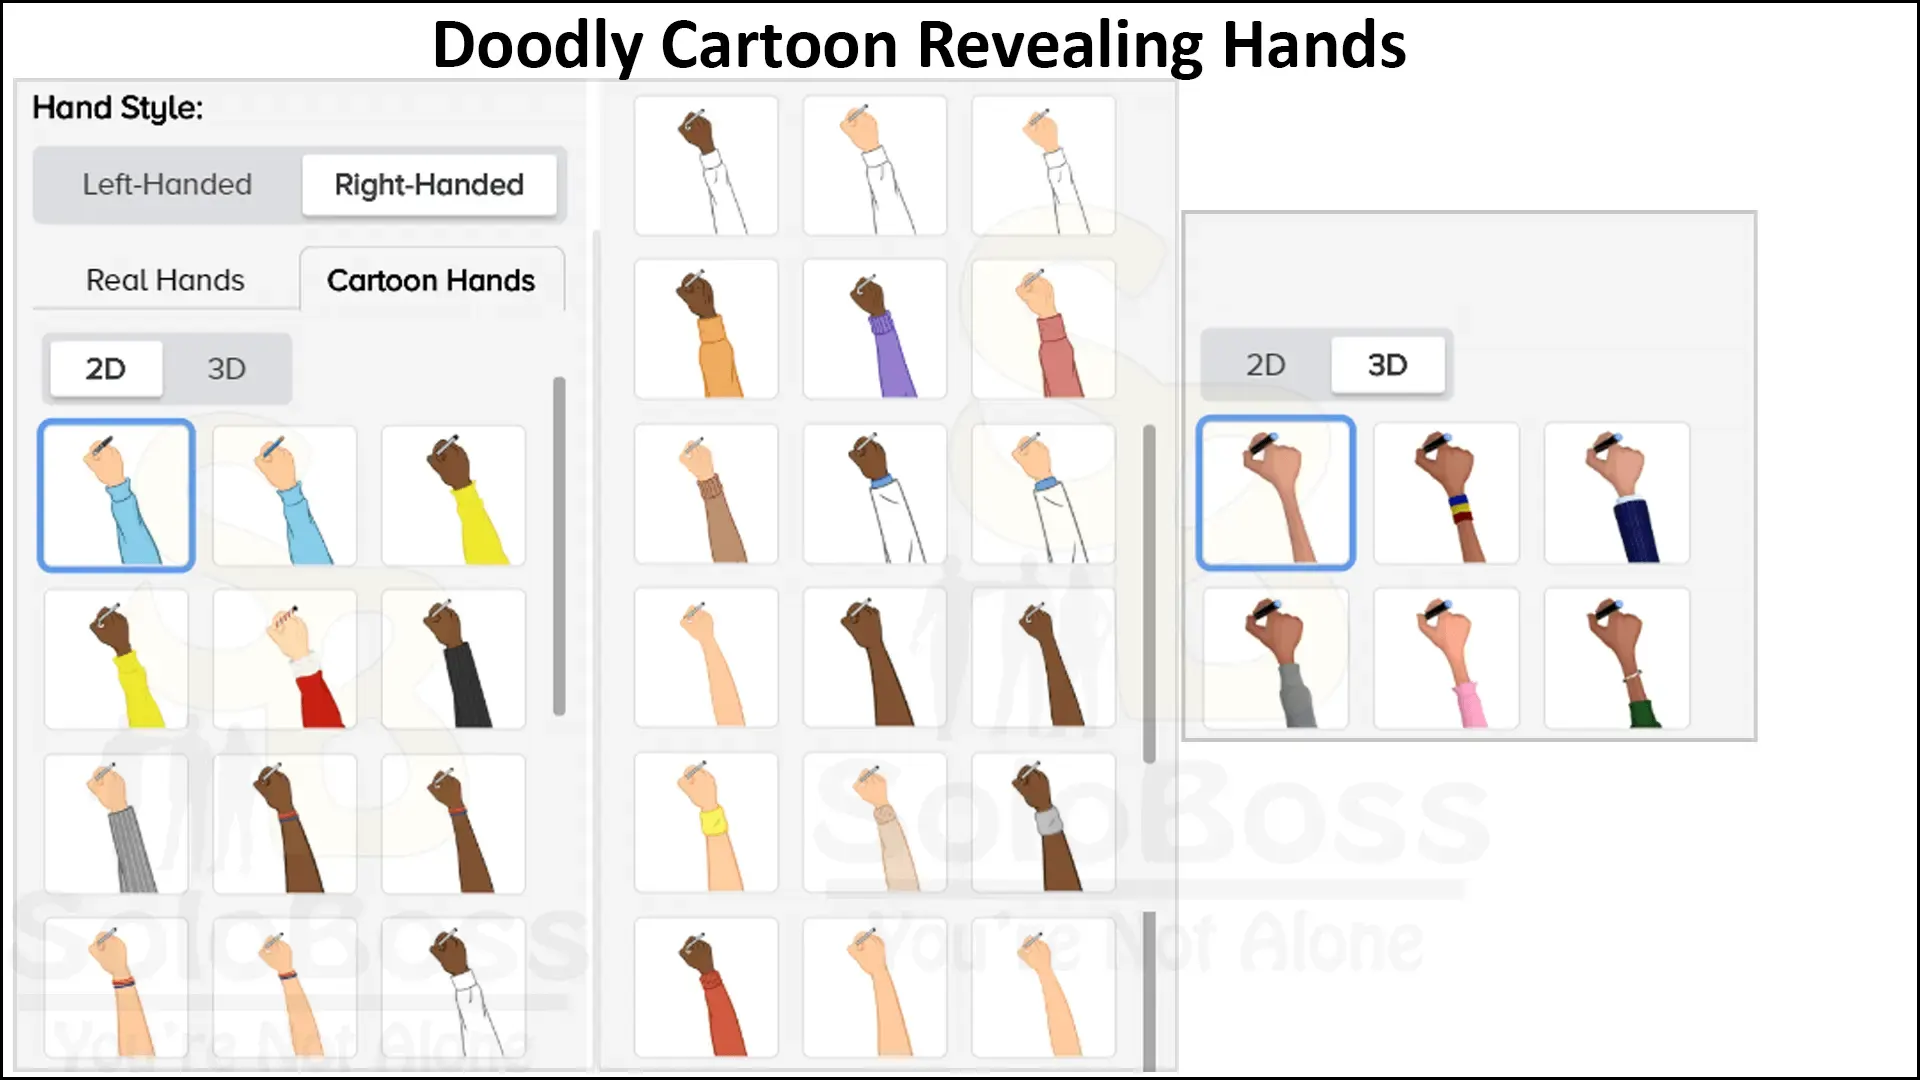 Displaying 2D and 3D cartoon drawing hands available in Doodly.